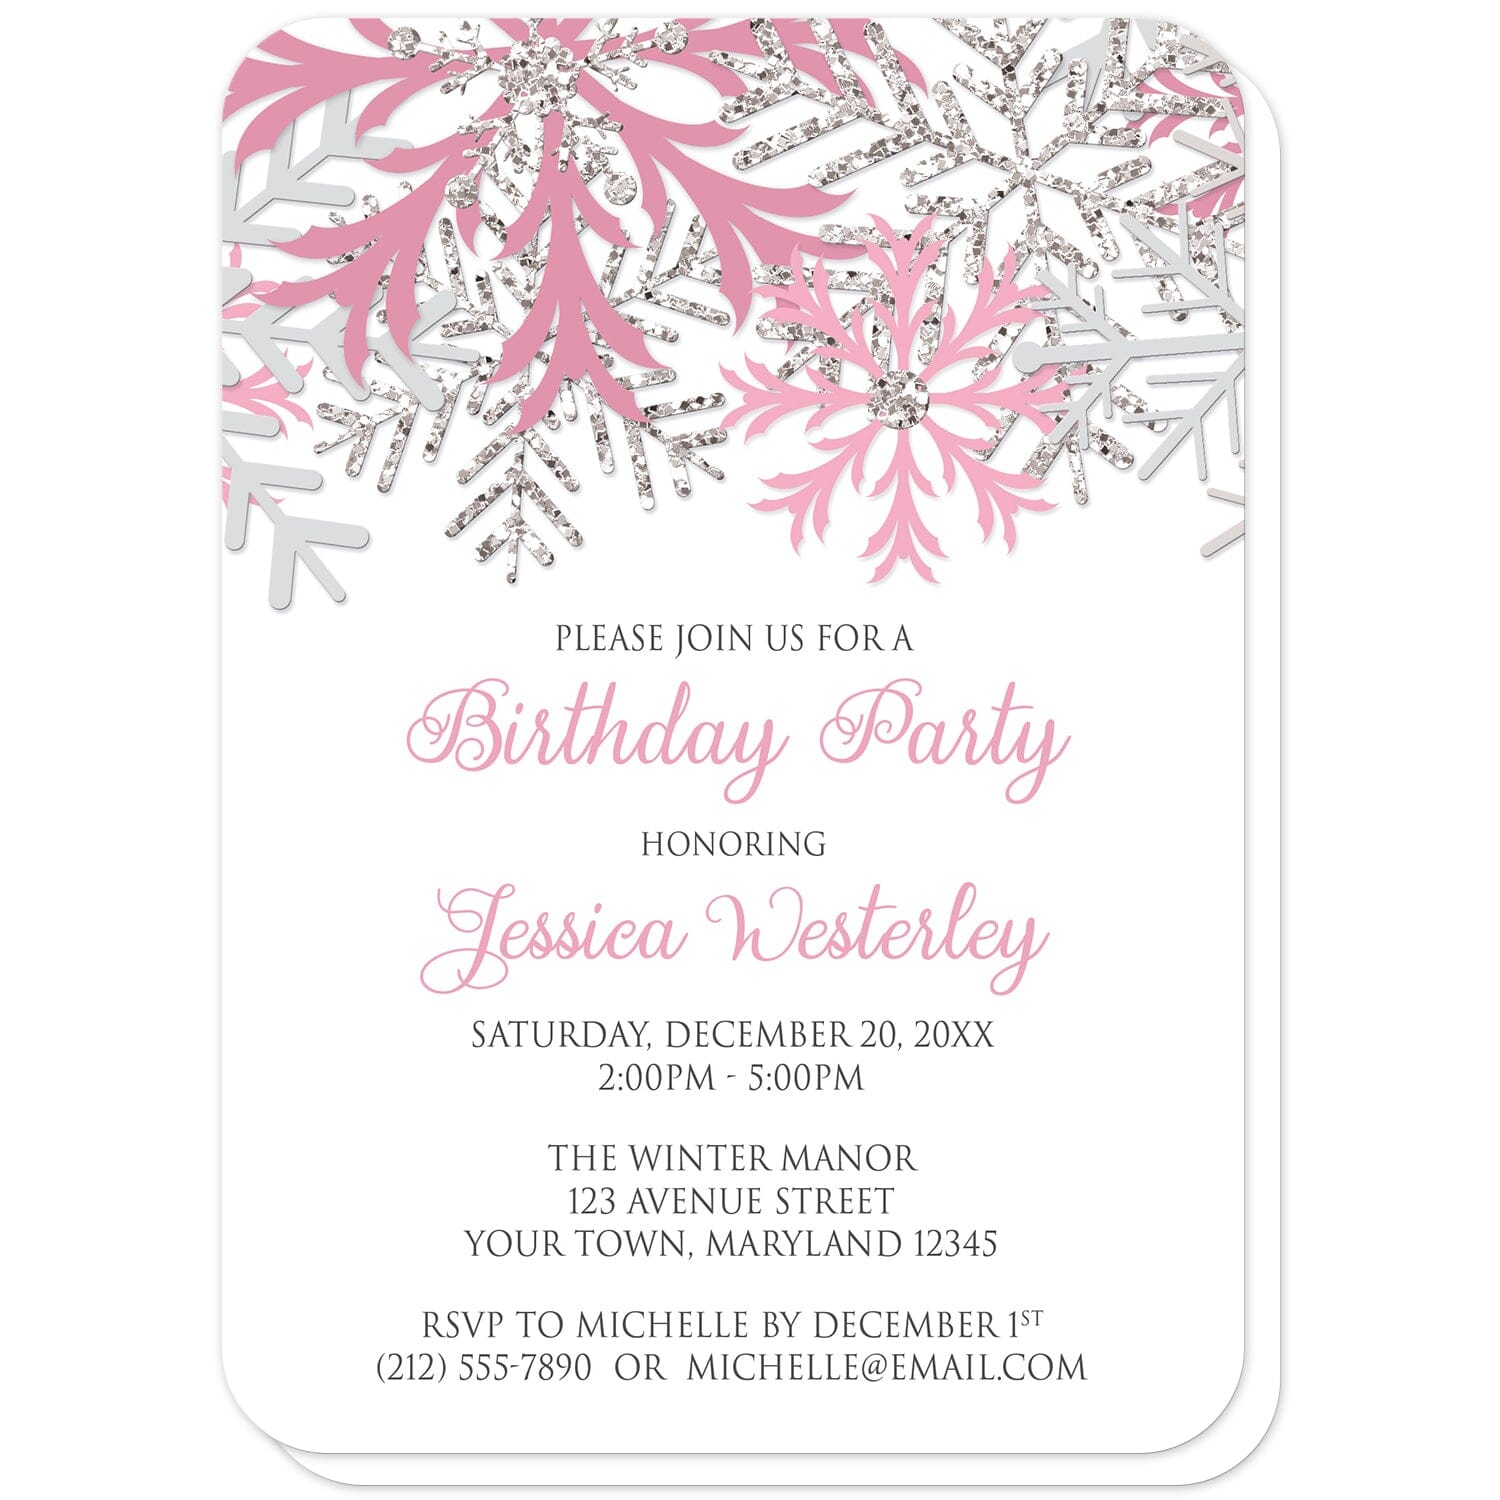 Winter Pink Silver Snowflake Birthday Party Invitations (with rounded corners) at Artistically Invited. Beautiful winter pink silver snowflake birthday party invitations designed with pink, light pink, silver-colored glitter-illustrated, and light gray snowflakes along the top over a white background. Your personalized birthday celebration details are custom printed in pink and gray below the pretty snowflakes.